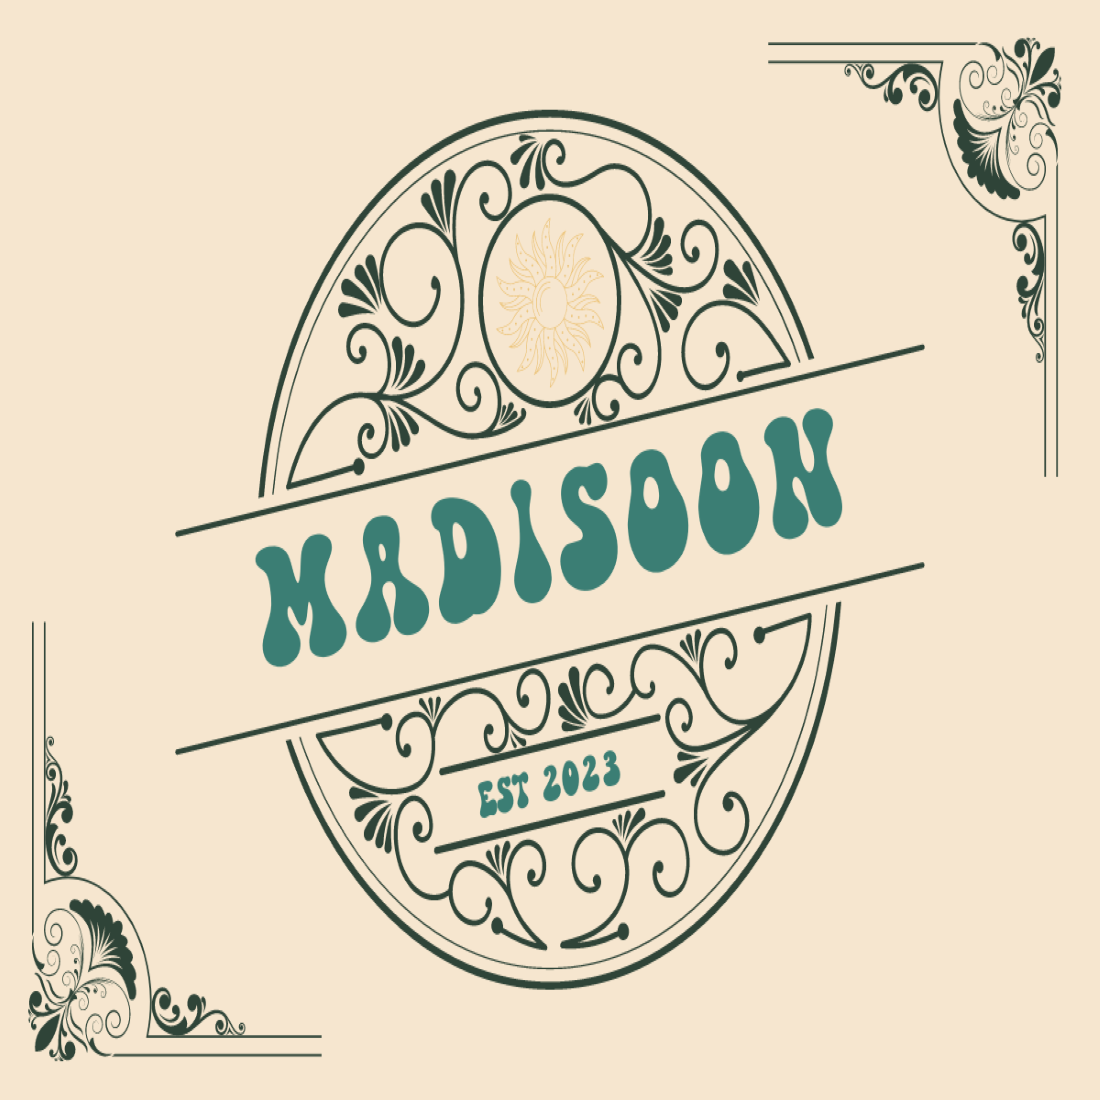 Madisoon - Retro Vintage Font cover image.